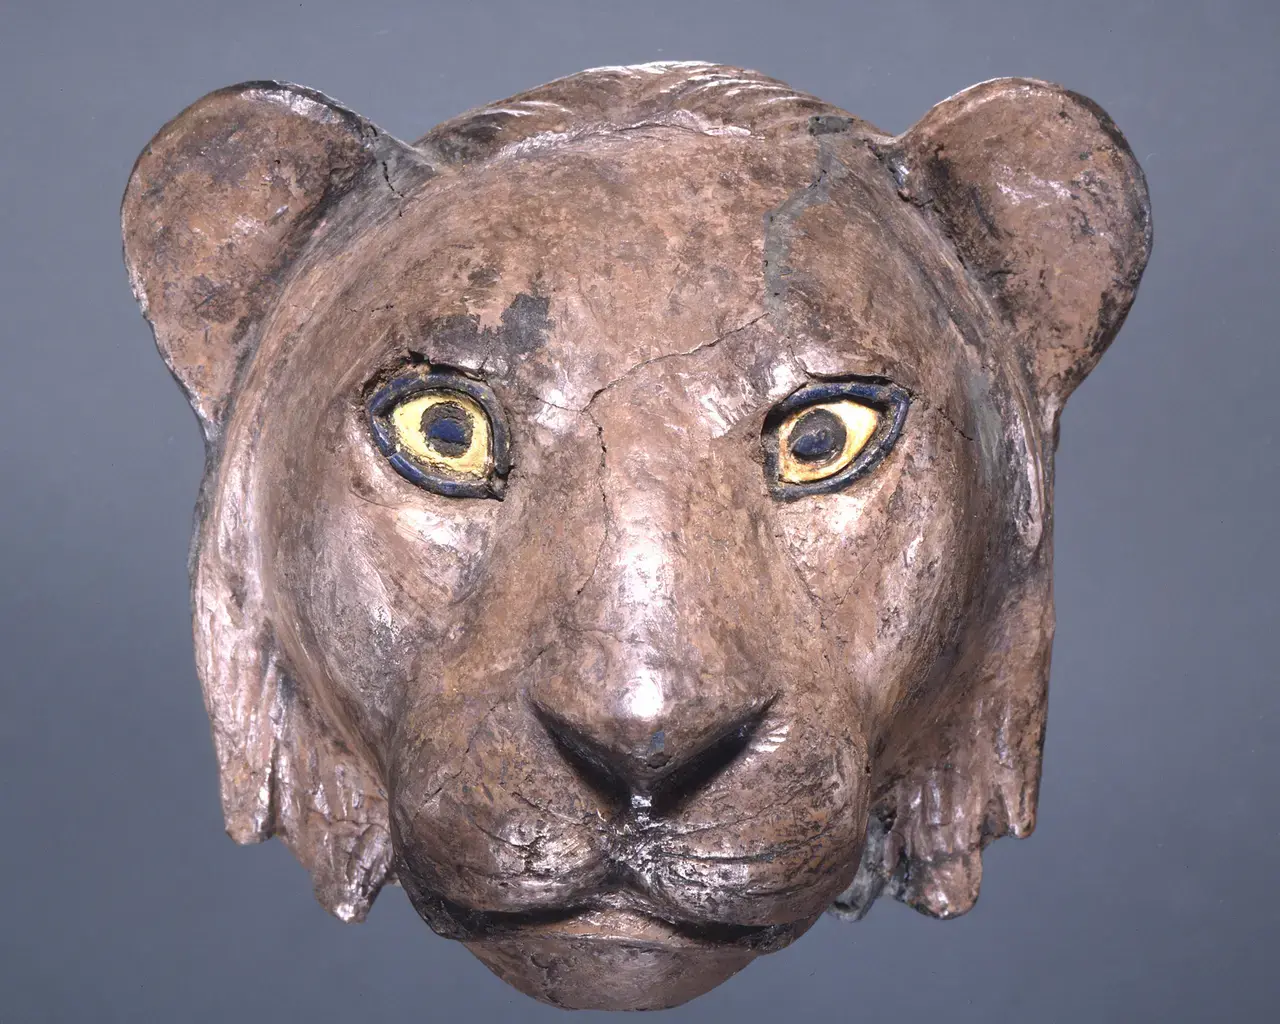 Head of lion (height: 11 cm; width: 12 cm) made of silver, lapis lazuli and shell, from the Royal Cemetery of Ur, ca 2550 BCE. Photo courtesy of Penn Museum.